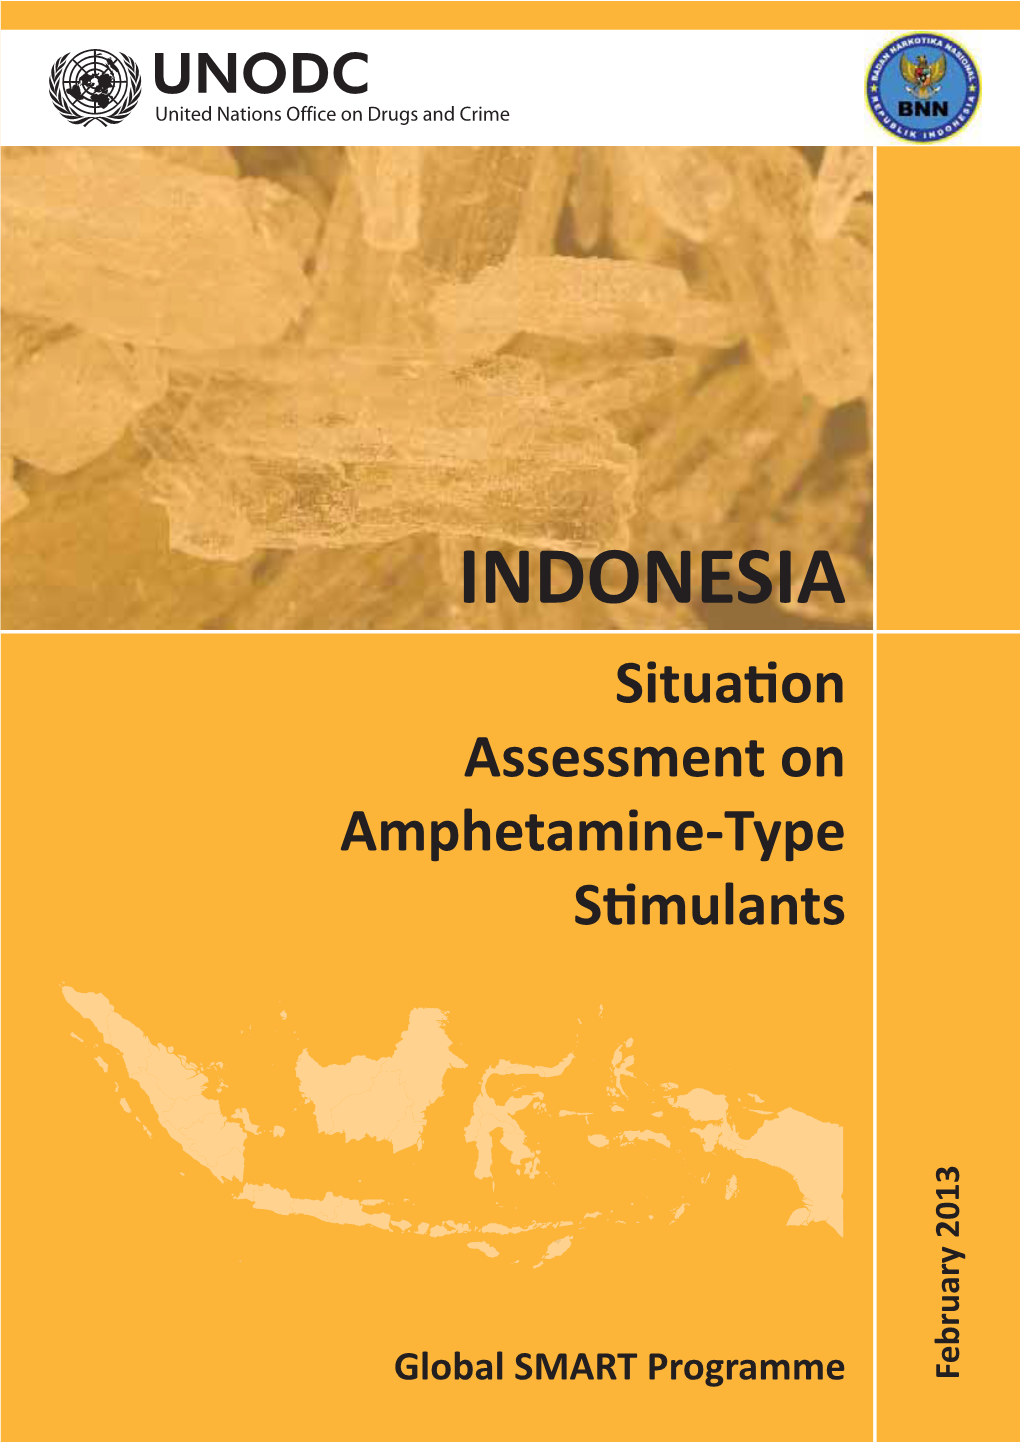 INDONESIA ATS Report 20130128.Indd